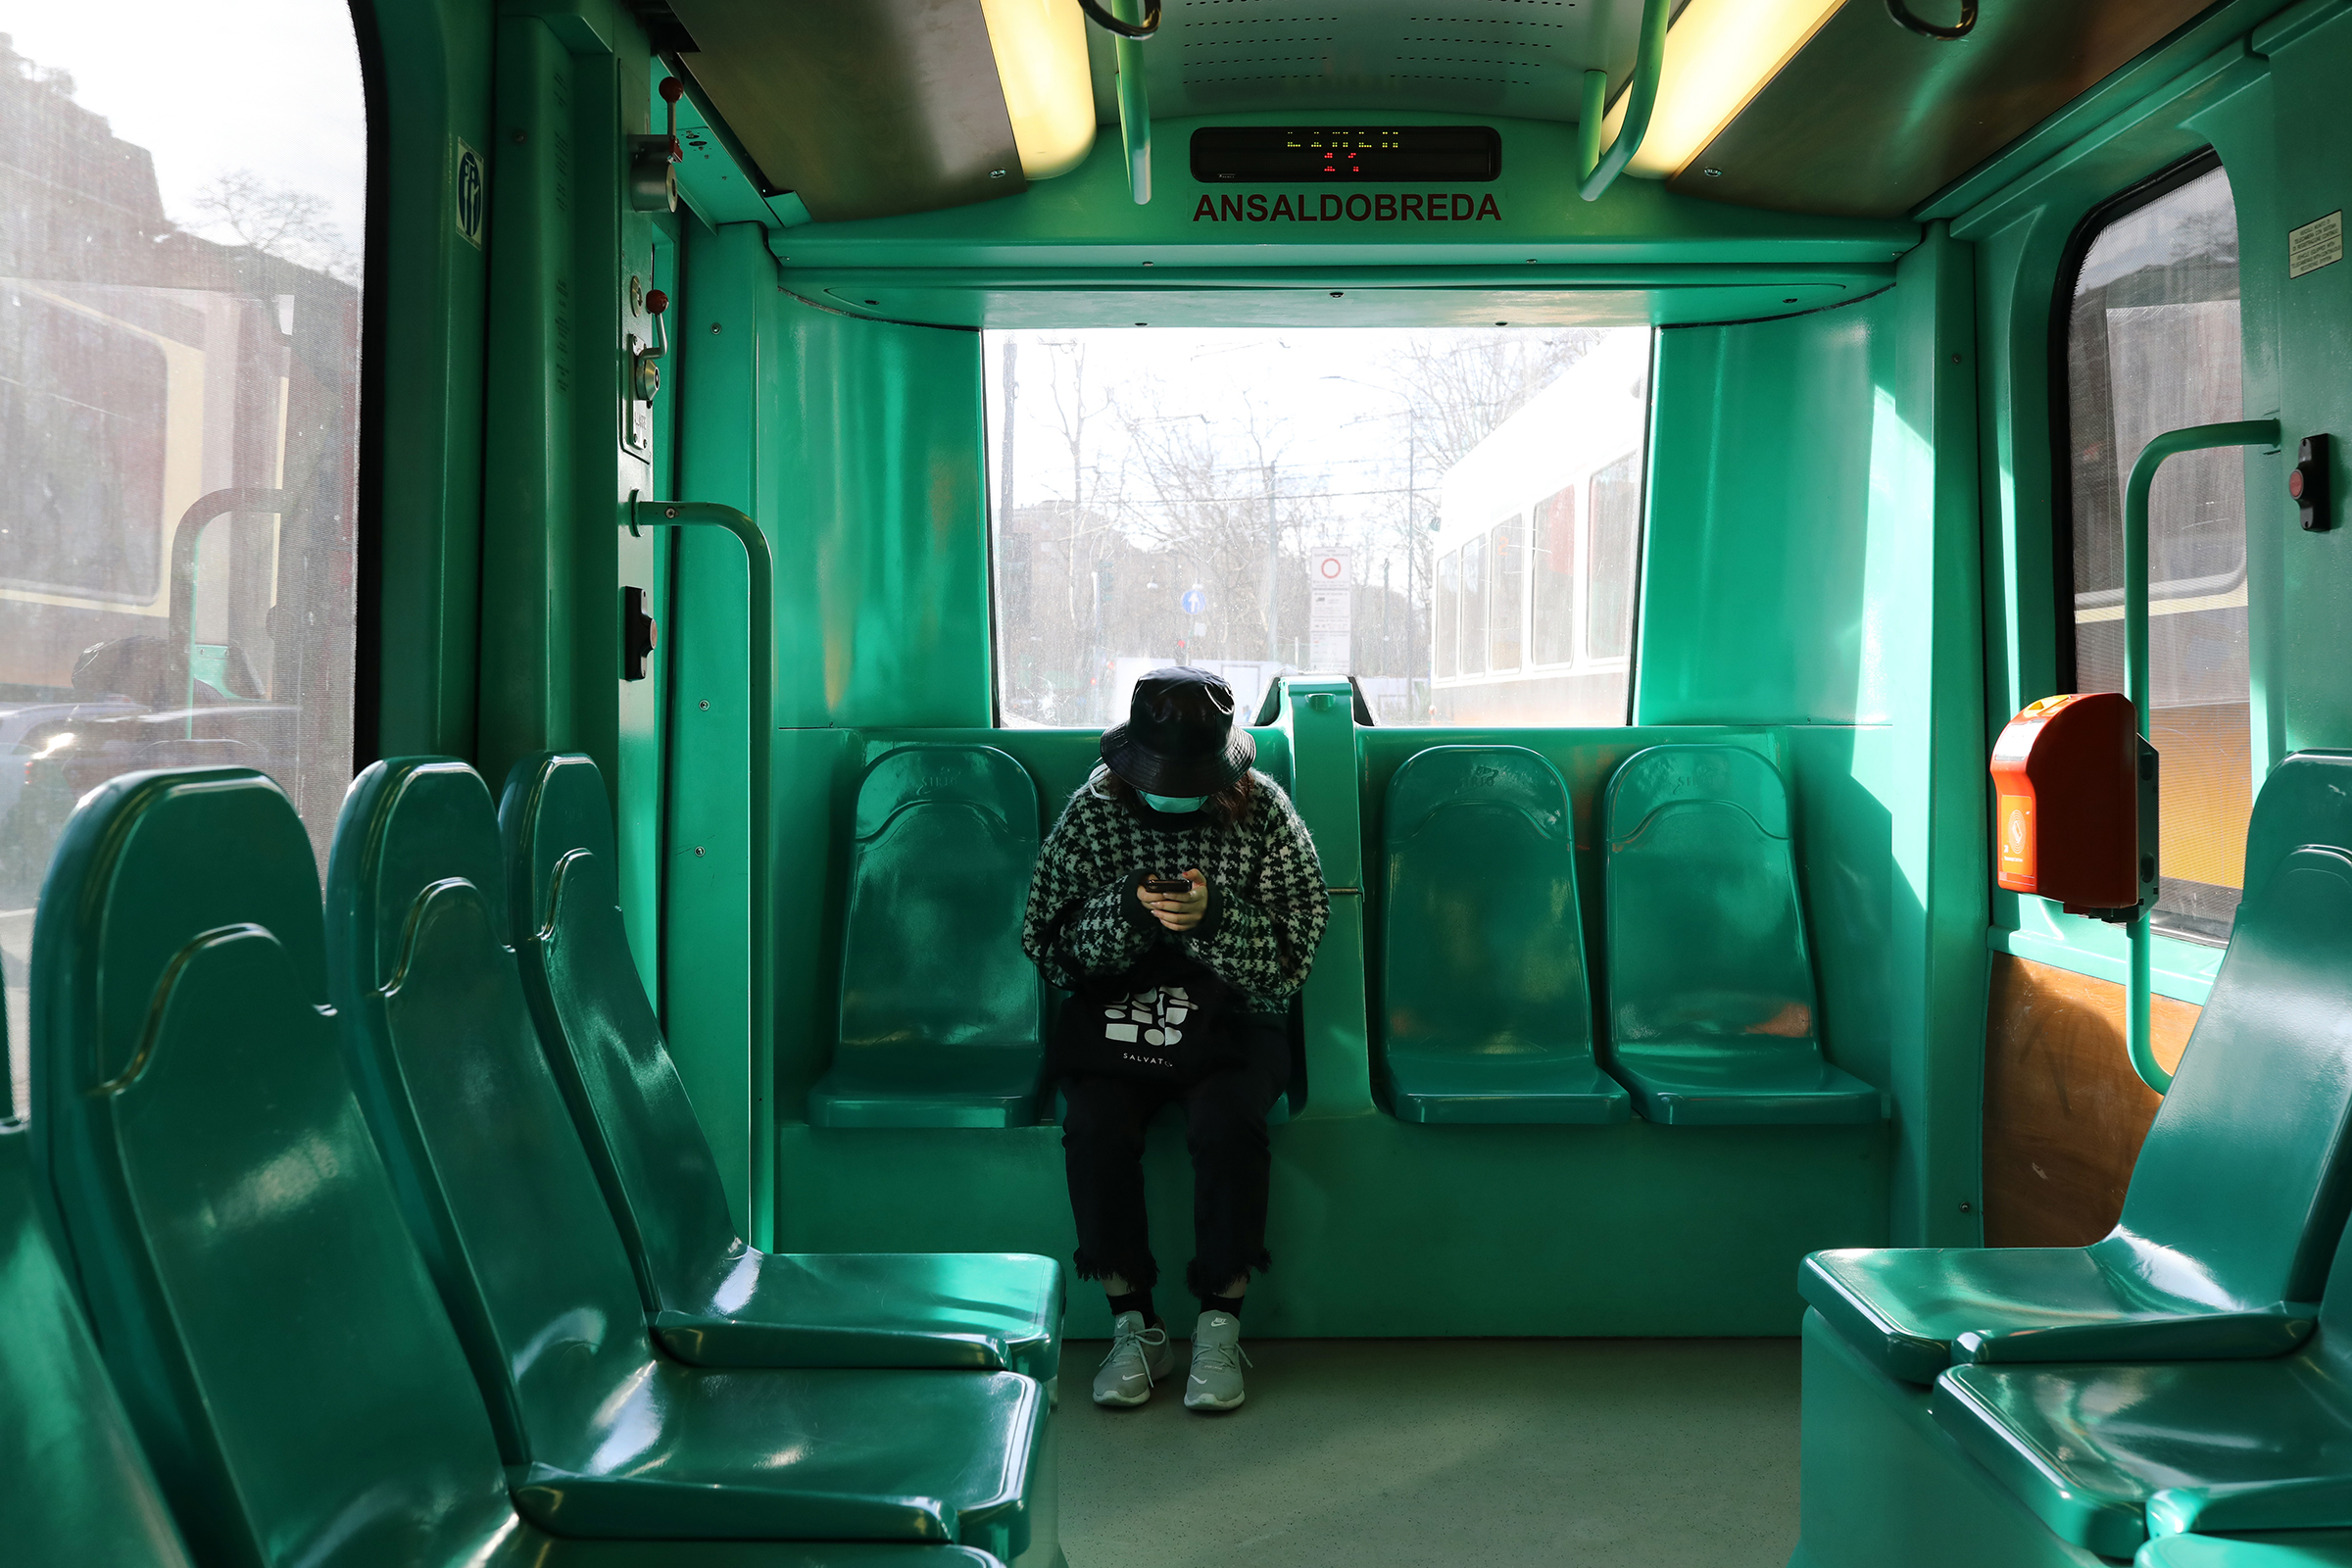 A woman wearing a protective mask is seen taking public transportation on Feb. 27 in Milan, Italy. (Marco Di Lauro—Getty Images)